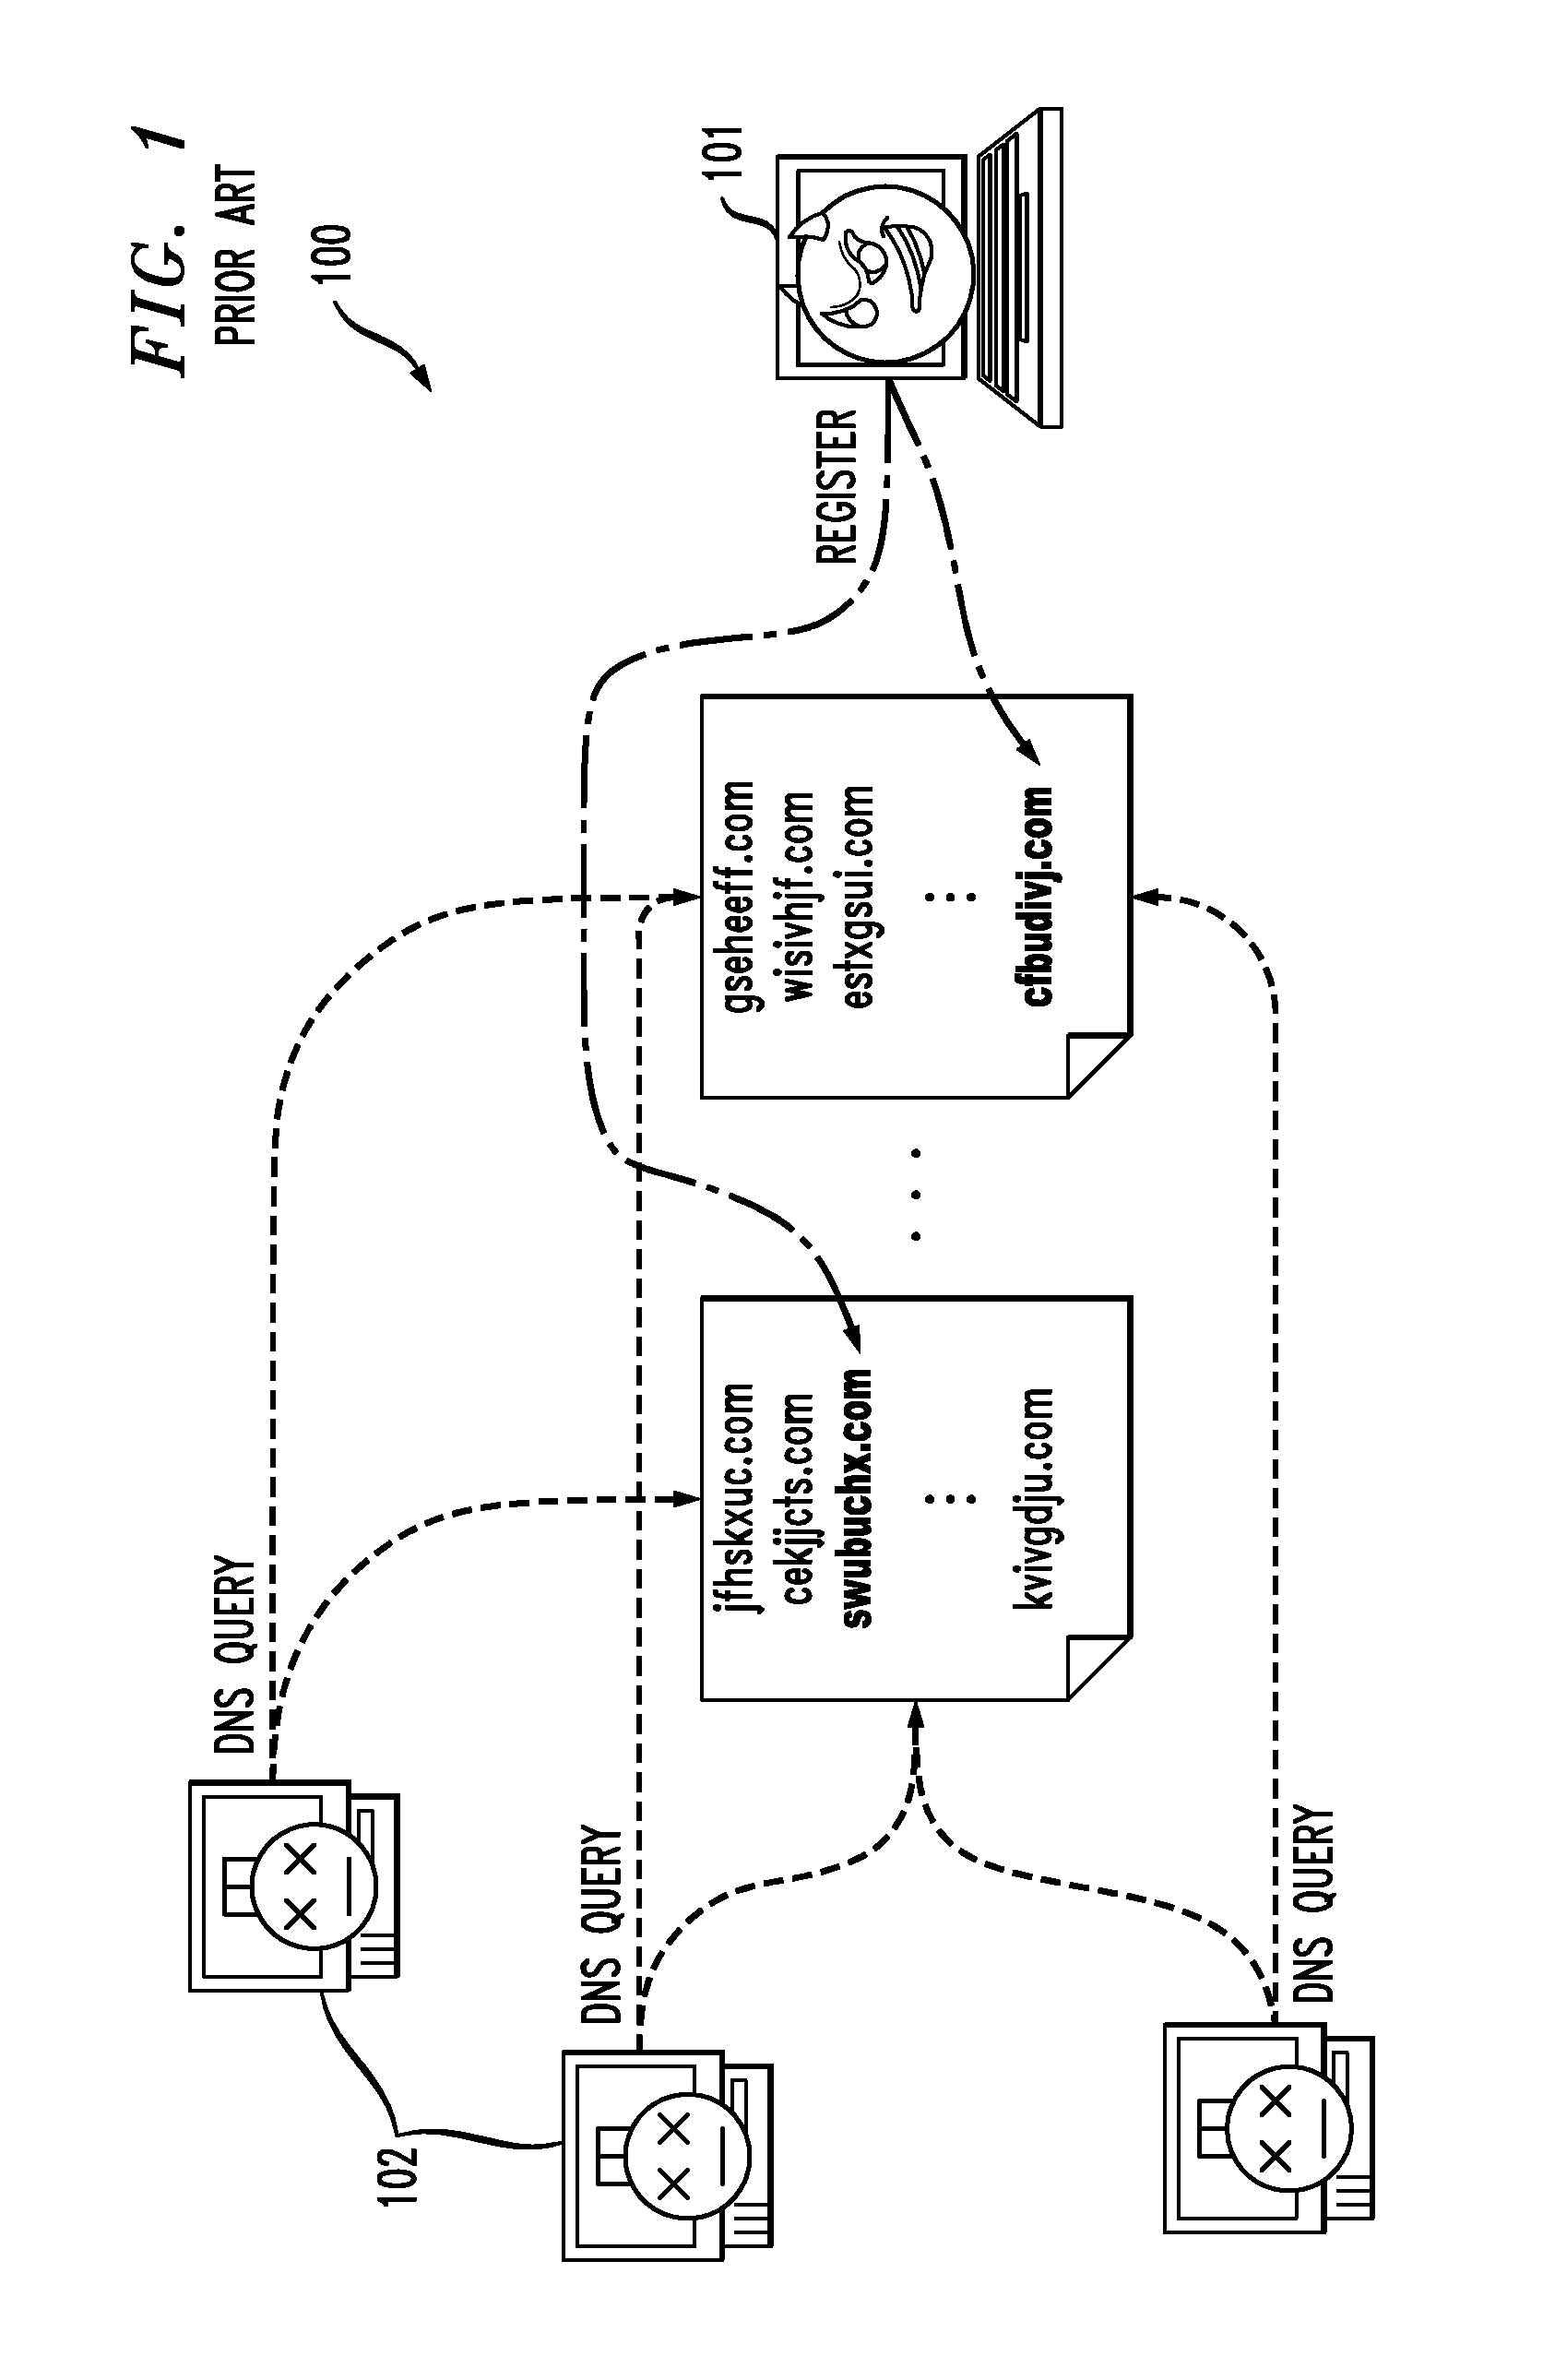 System and method for detection of domain-flux botnets and the like